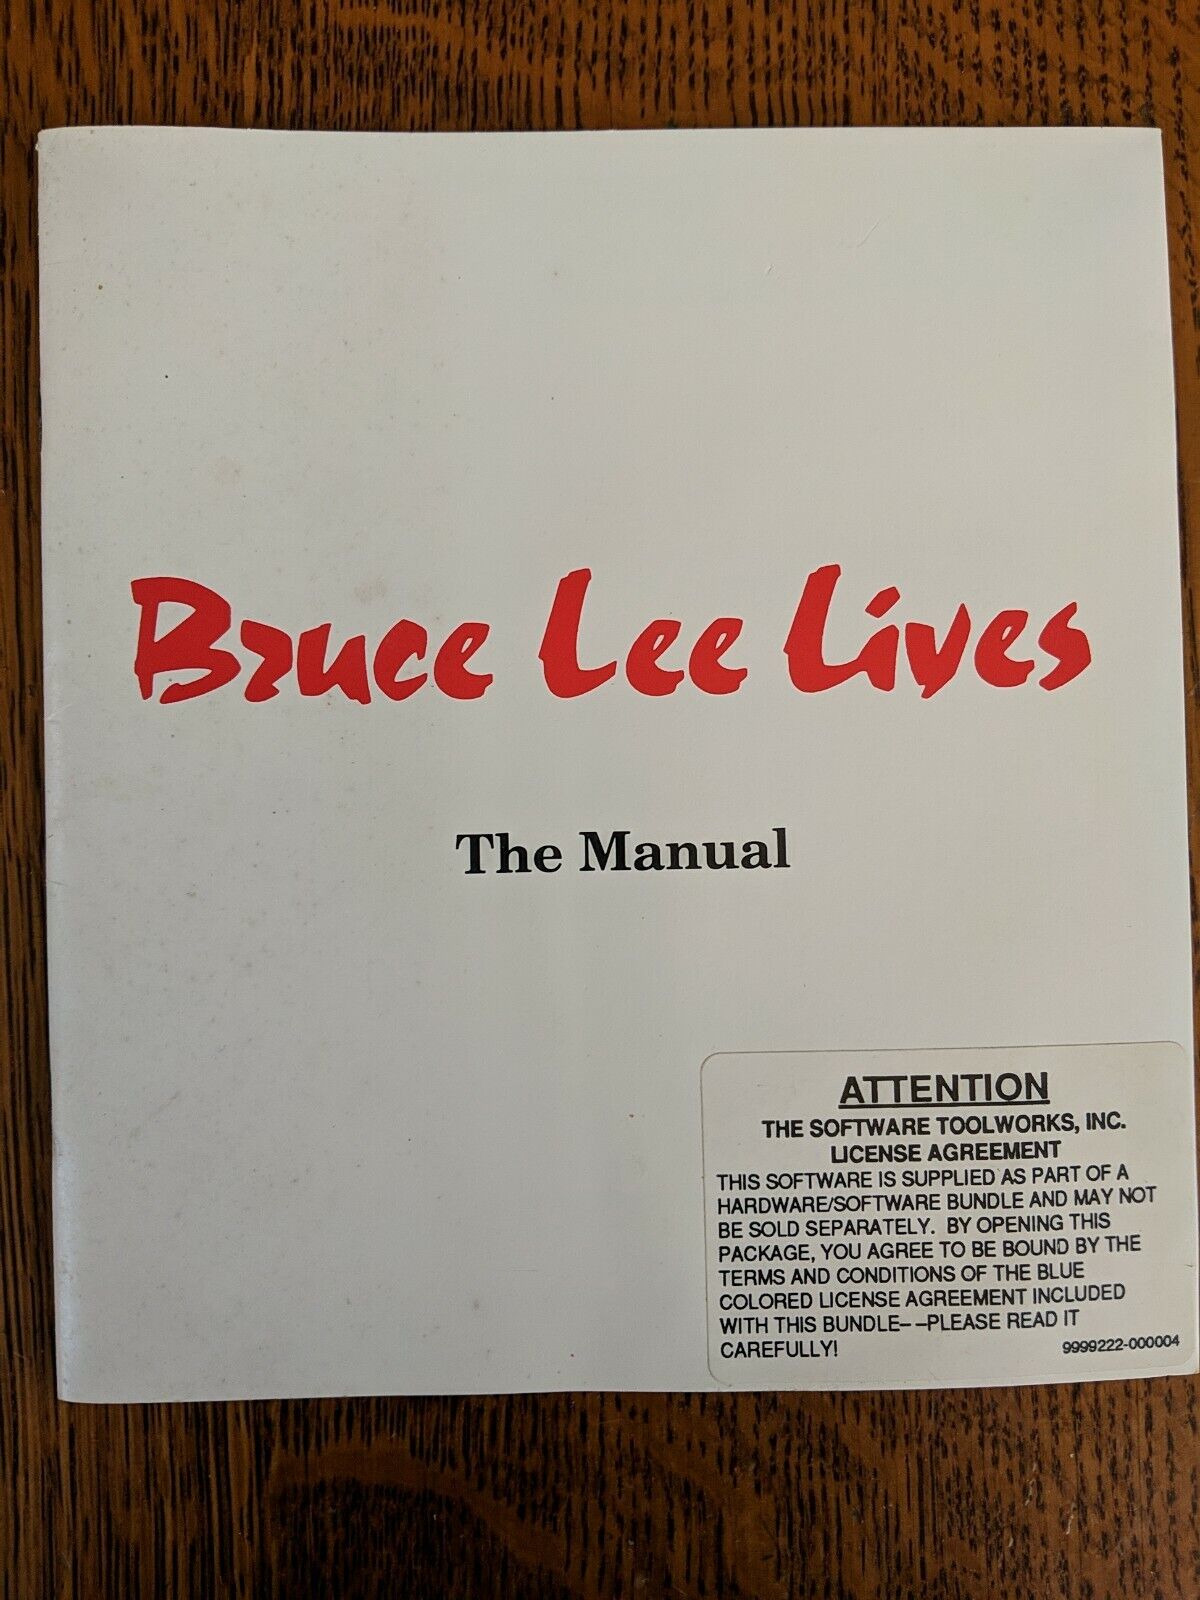 Vintage 1989 IBM PC Bruce Lee Lives The Fall of Hong Kong Palace [MANUAL ONLY] 